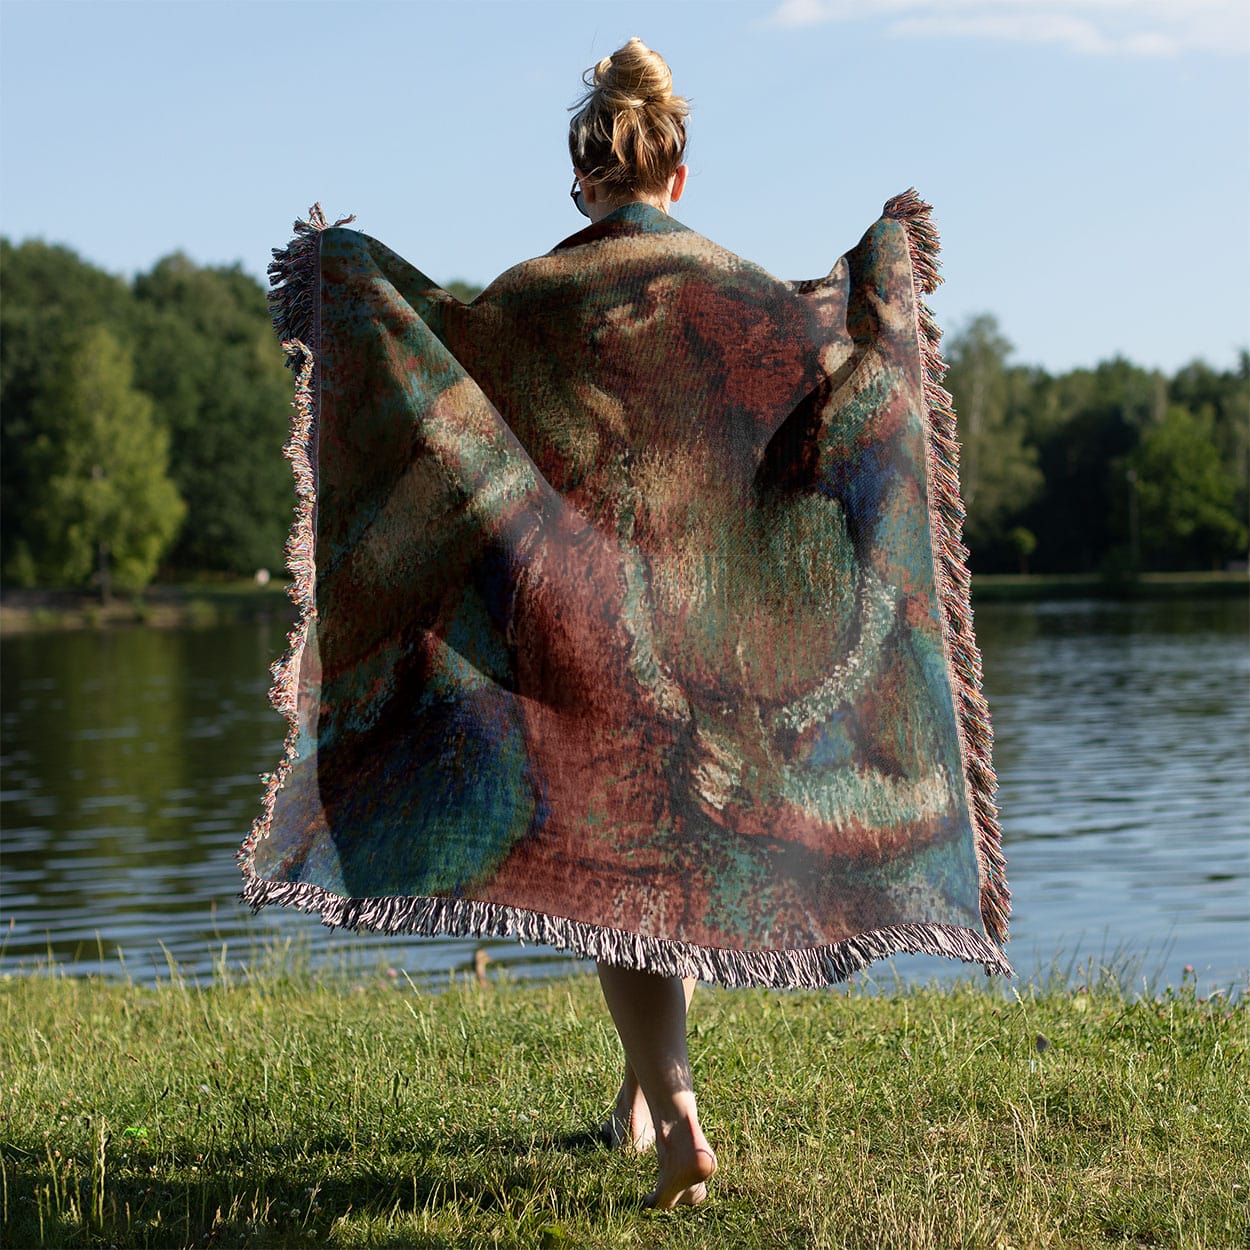 Impressionist Woven Blanket Held on a Woman's Back Outside